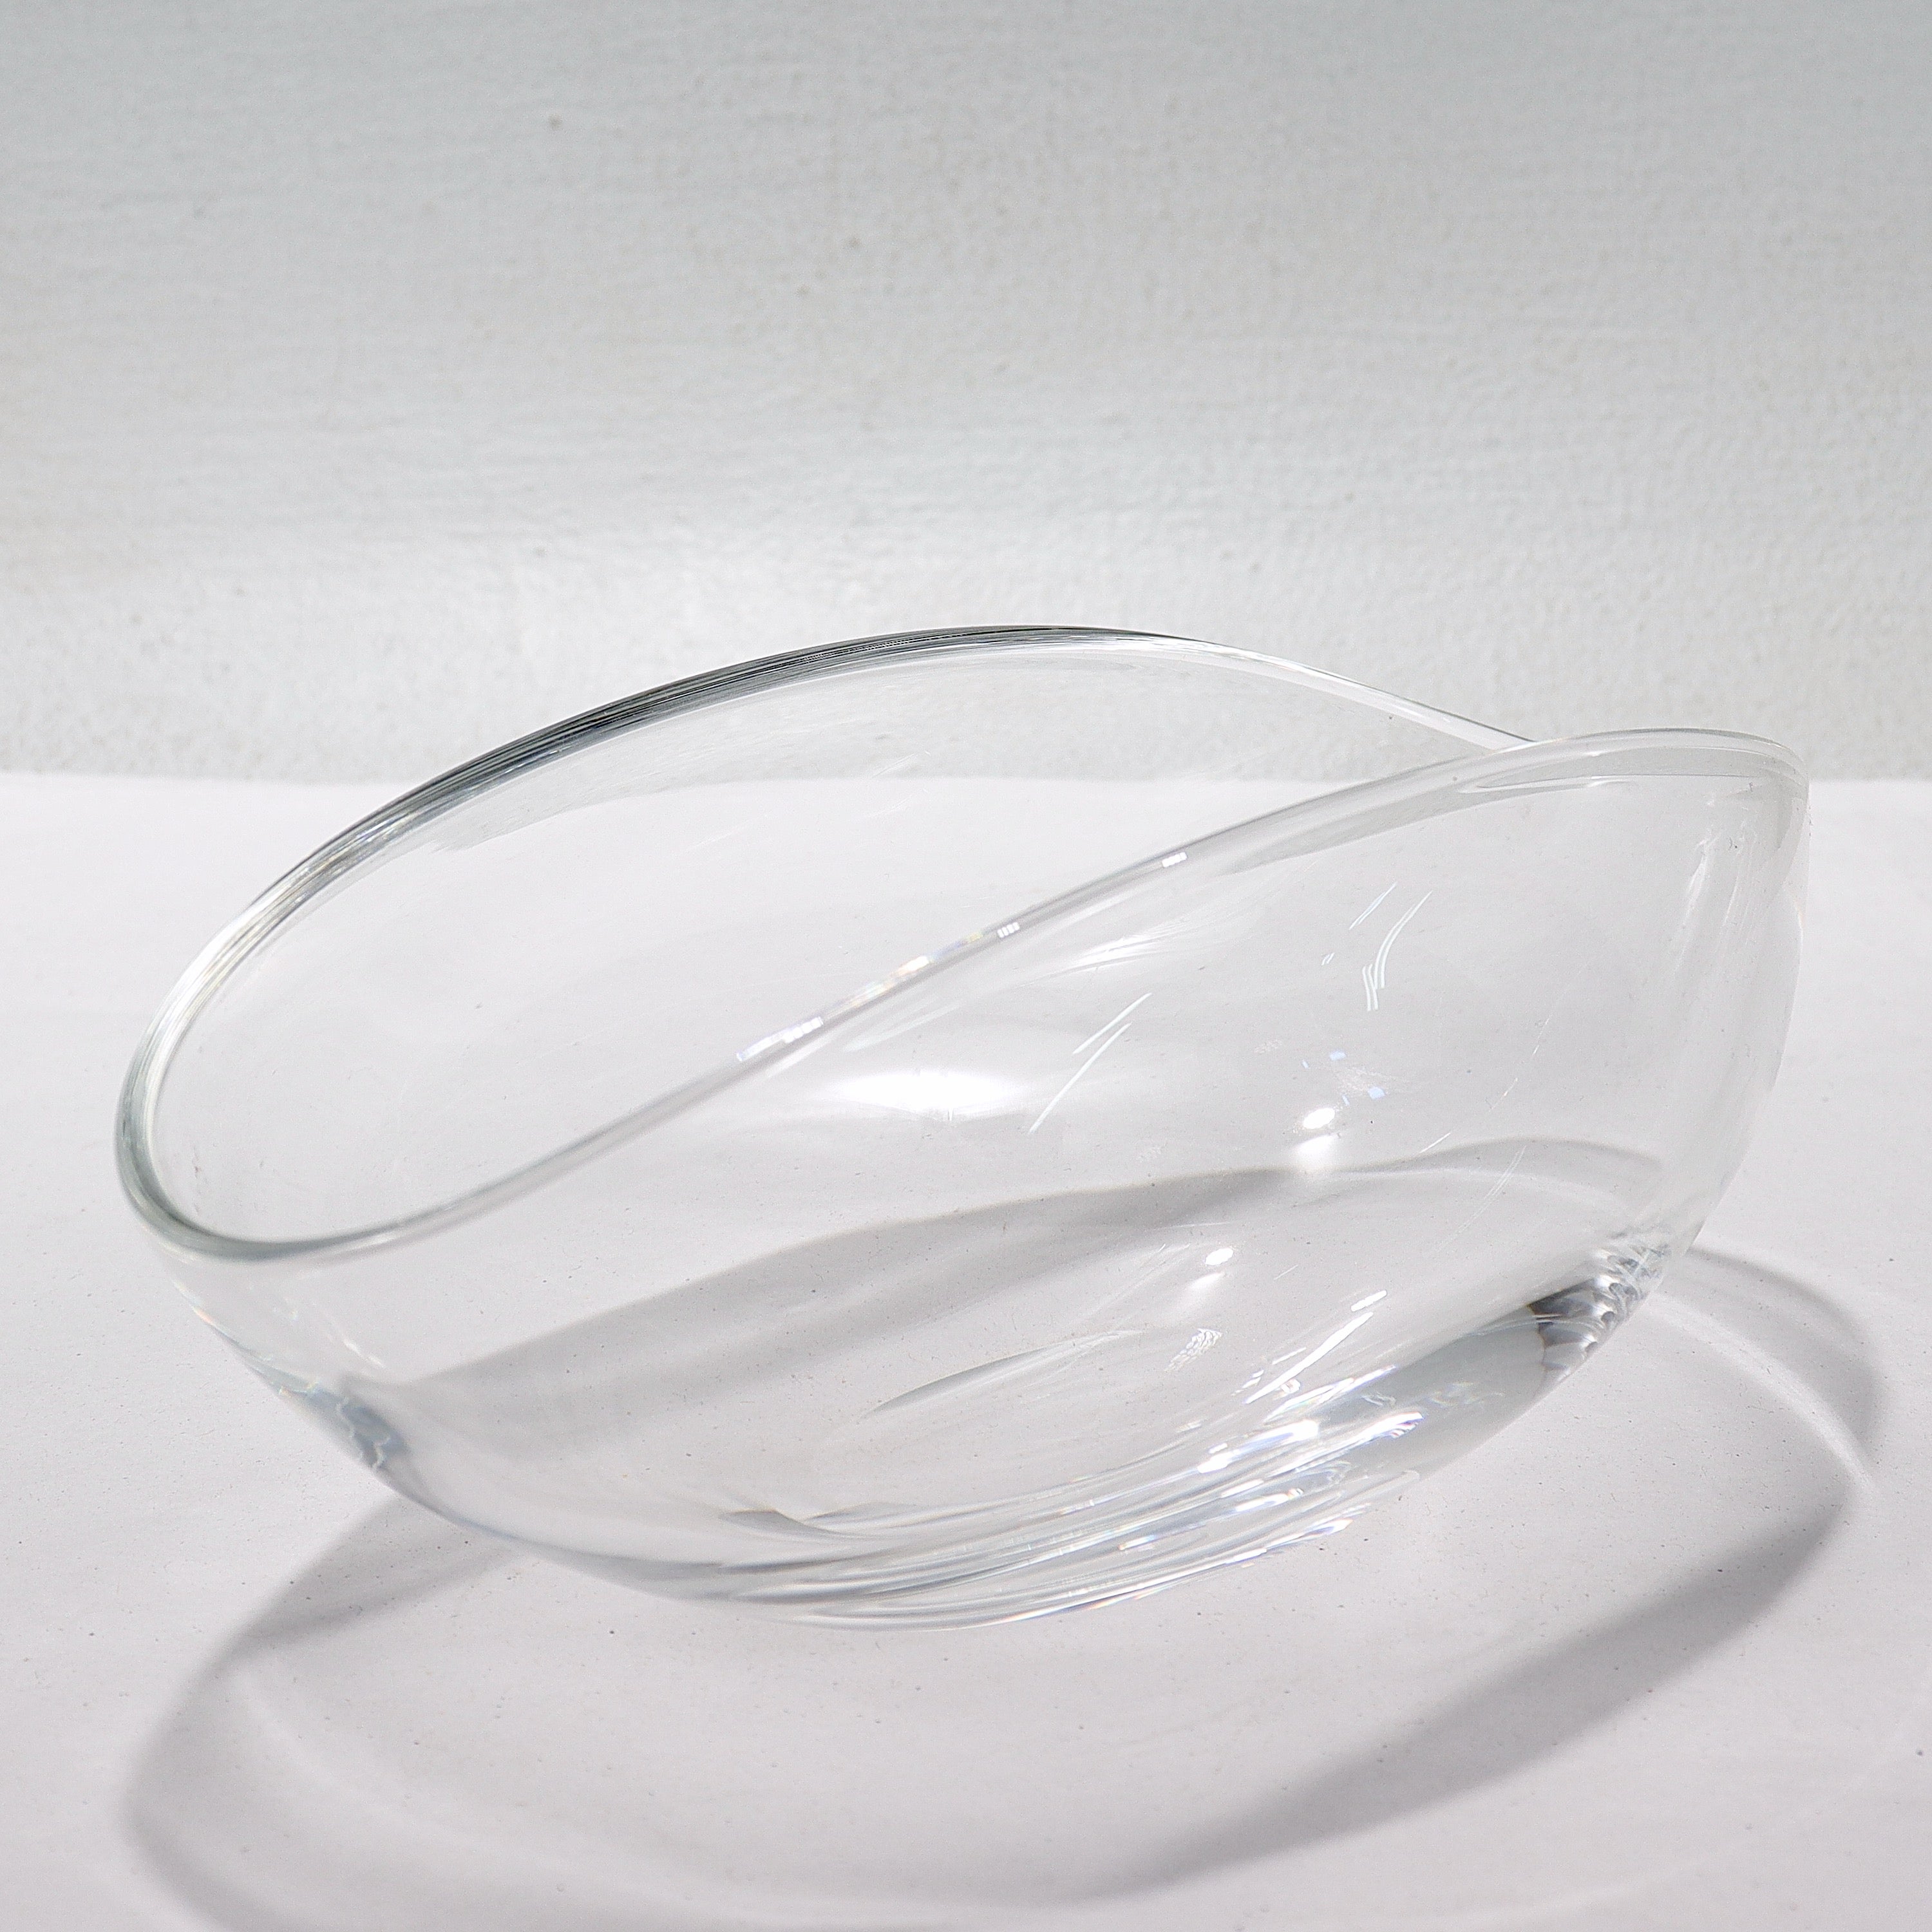 A fine vintage art glass bowl.

By Steuben.

In a folded oval shape.

Simply a great piece of Steuben glass!

Date:
circa 1980s

Overall Condition:
It is in overall good, as-pictured, used estate condition with no chips, cracks, or repairs, some